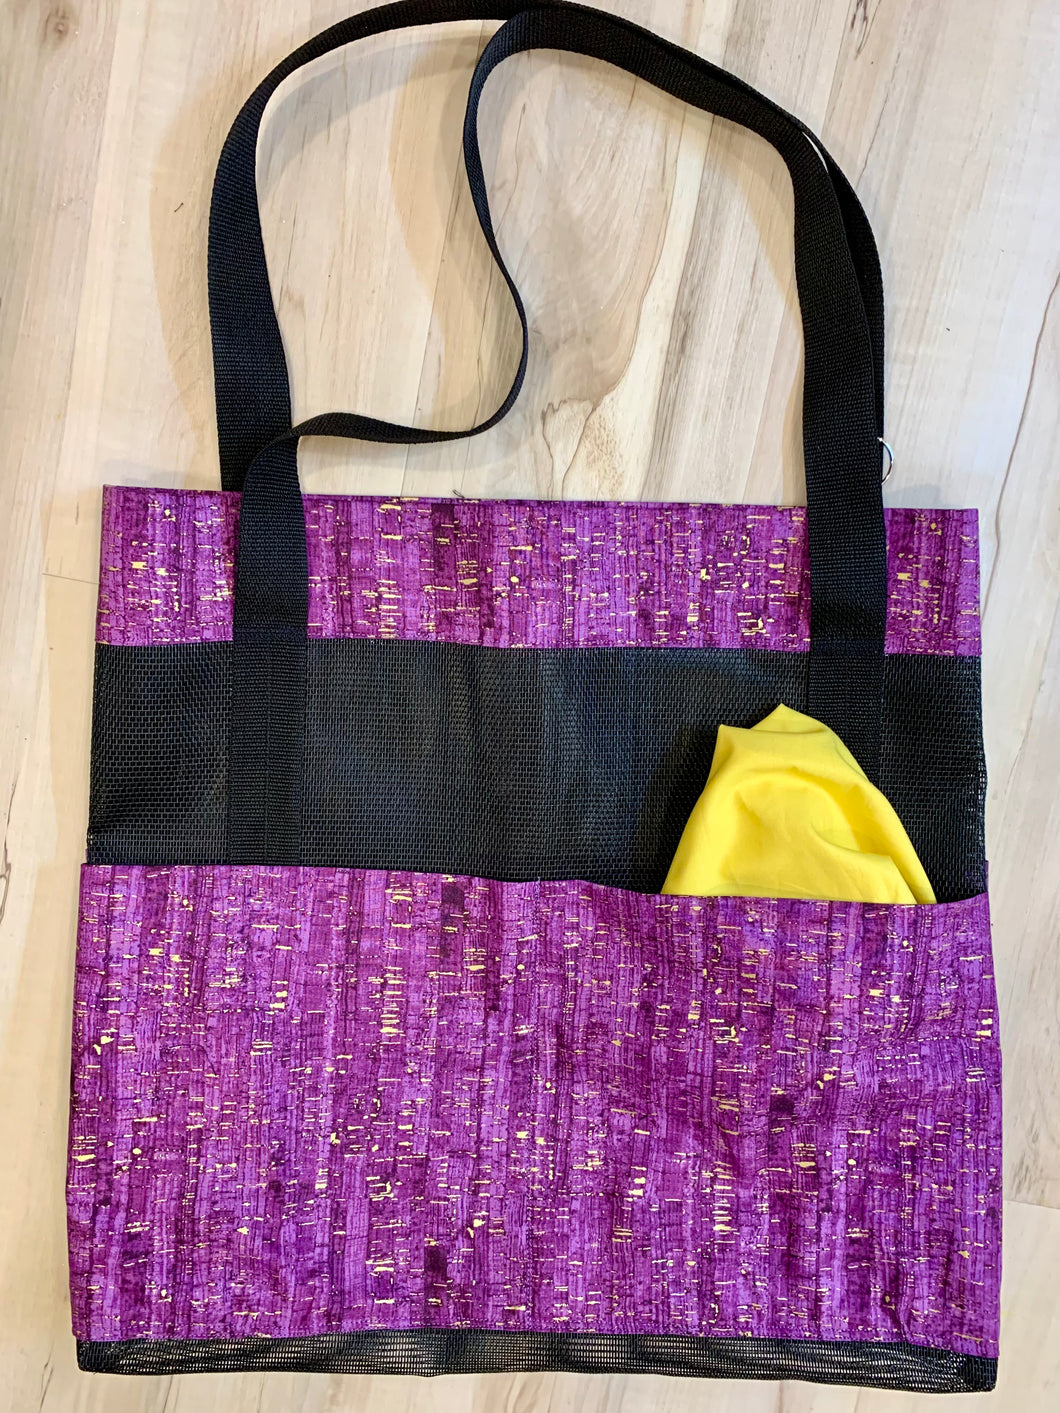 Flag Bag Tote    .    .    .    .    .    .    .    .    .     .    Corked in Purple & Gold